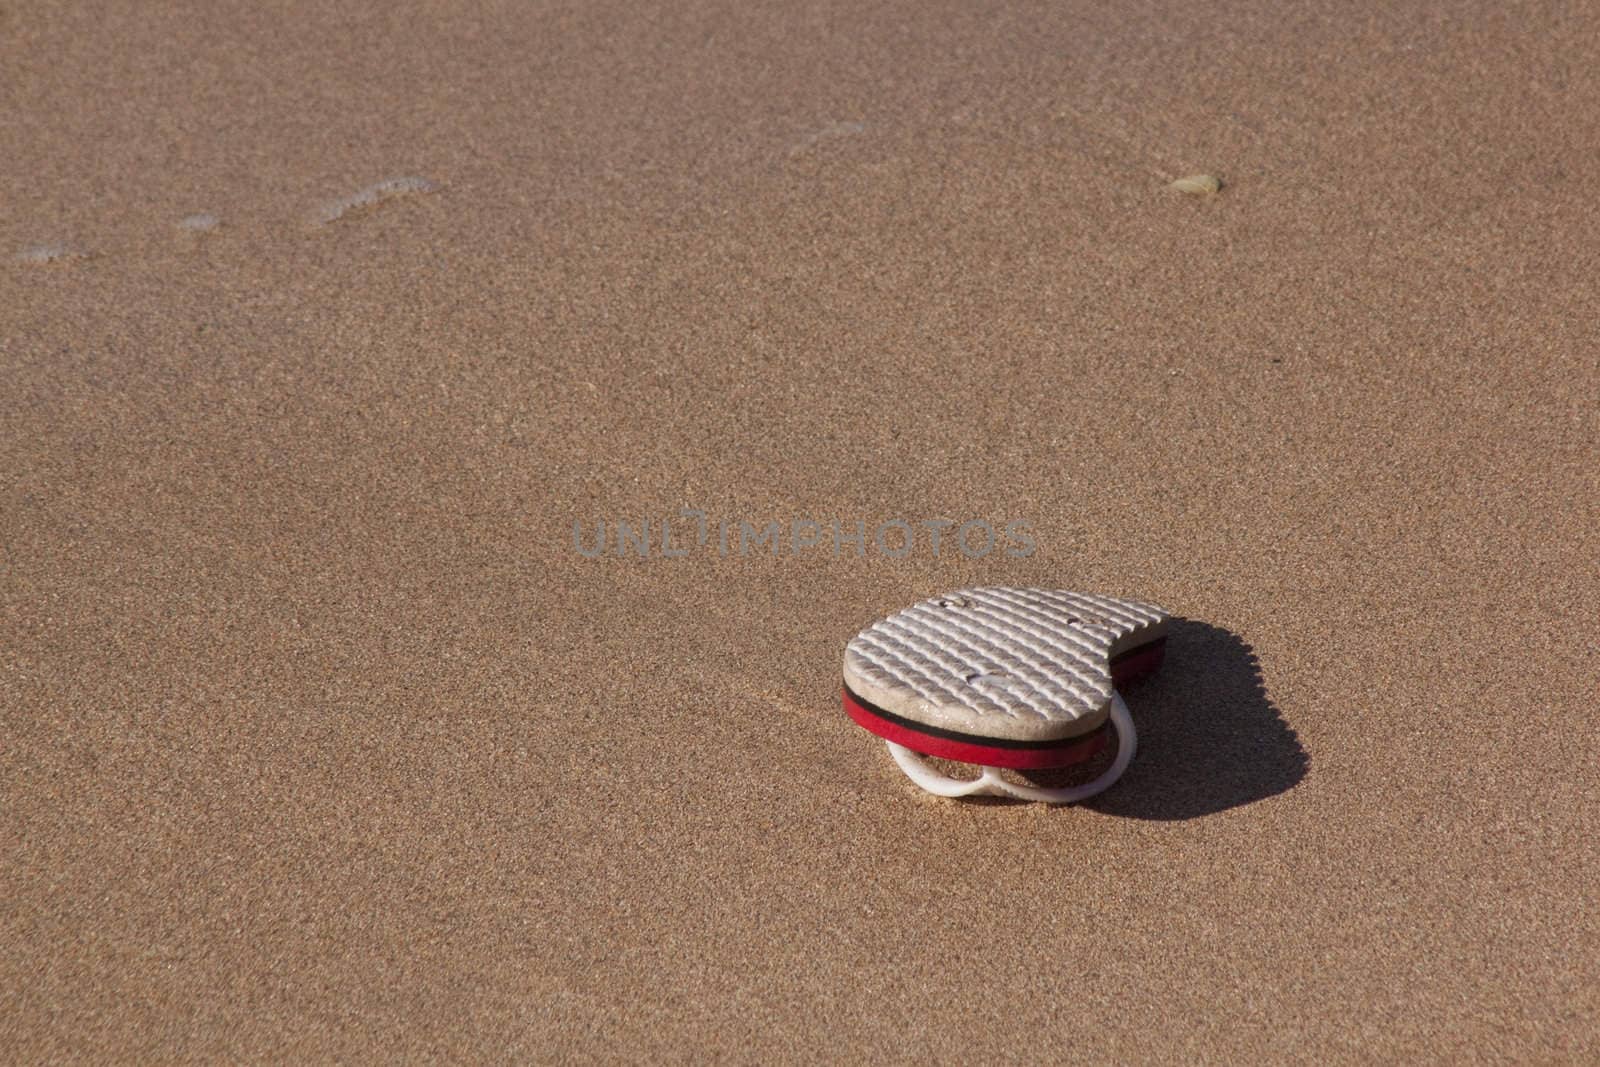 abandoned flip flop on the beach